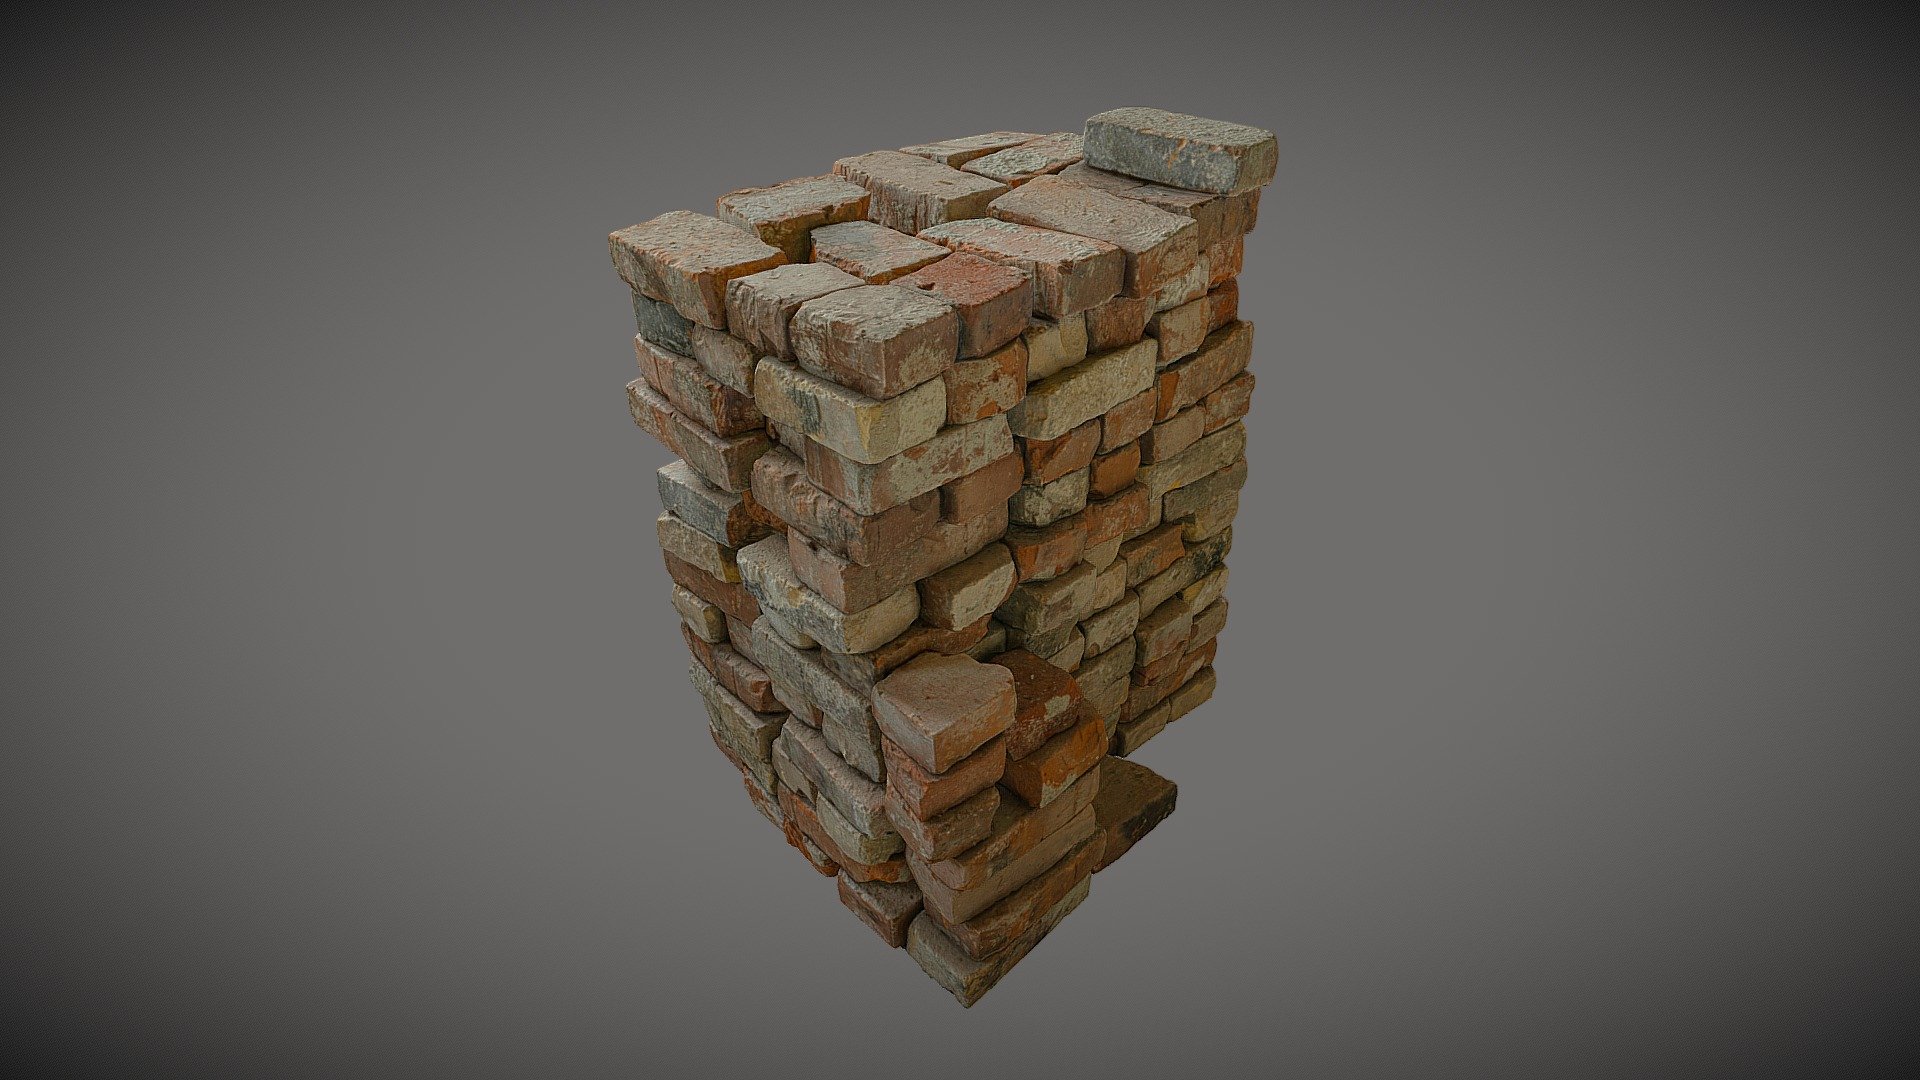 Stack of bricks.

Model 3D created in RC from 109 images (sony a6000)

Download version:

FBX Triangles: 100 K Textures: 1x8192x8192u1v1 jpg + normal

FBX Triangles: 1 mln Textures: 2x8192x8192u1v1 jpg + normal

All normal maps generated from 3D model with 25 mln triangles.

If you need re-exporting or are interested in source images, please email me.

If you like my work leave a like or comment and follow me for more! Thanks :) - Stack of bricks - Buy Royalty Free 3D model by archiwum_xyz 3d model